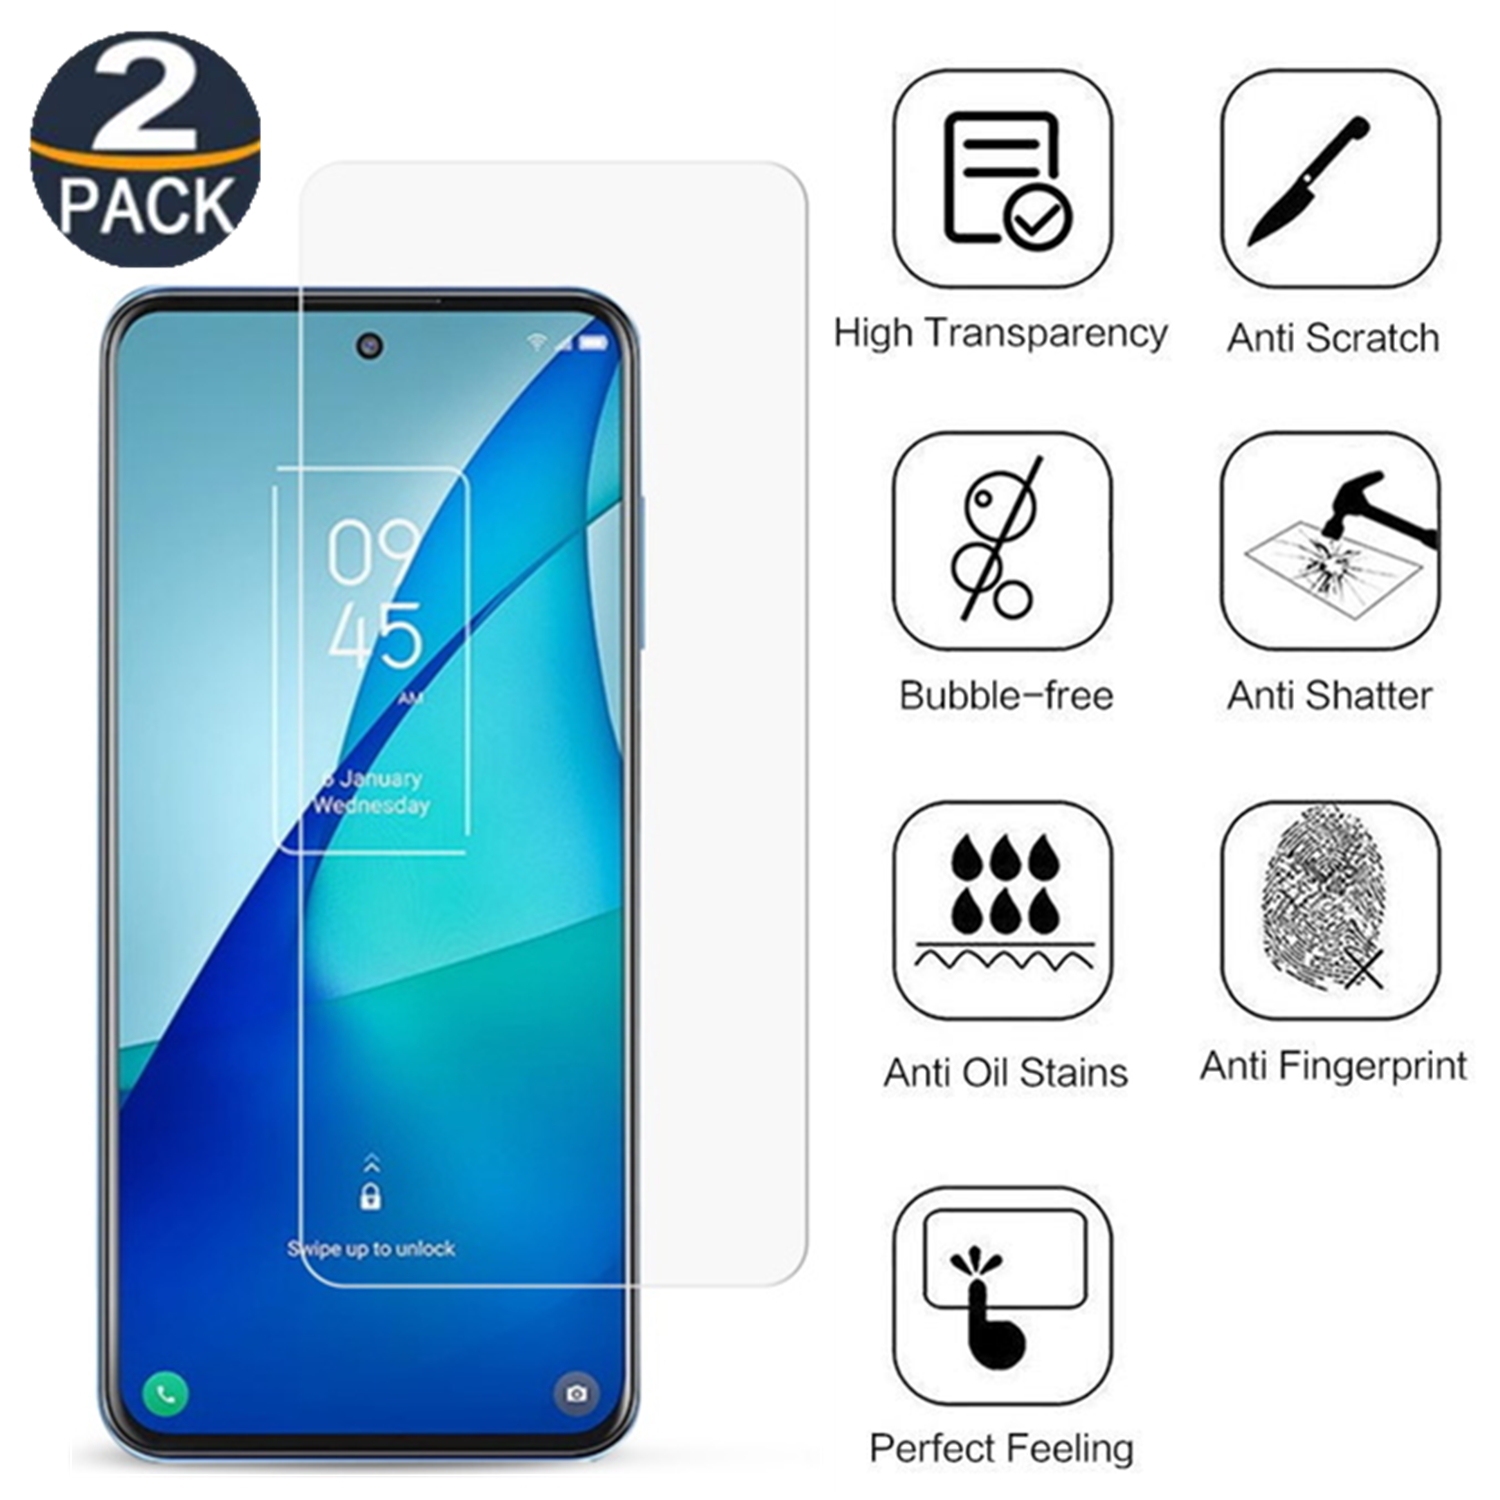 【2 Packs】 CSmart Premium Tempered Glass Screen Protector for TCL 20S / 20L / 20L Plus, Case Friendly & Bubble Free